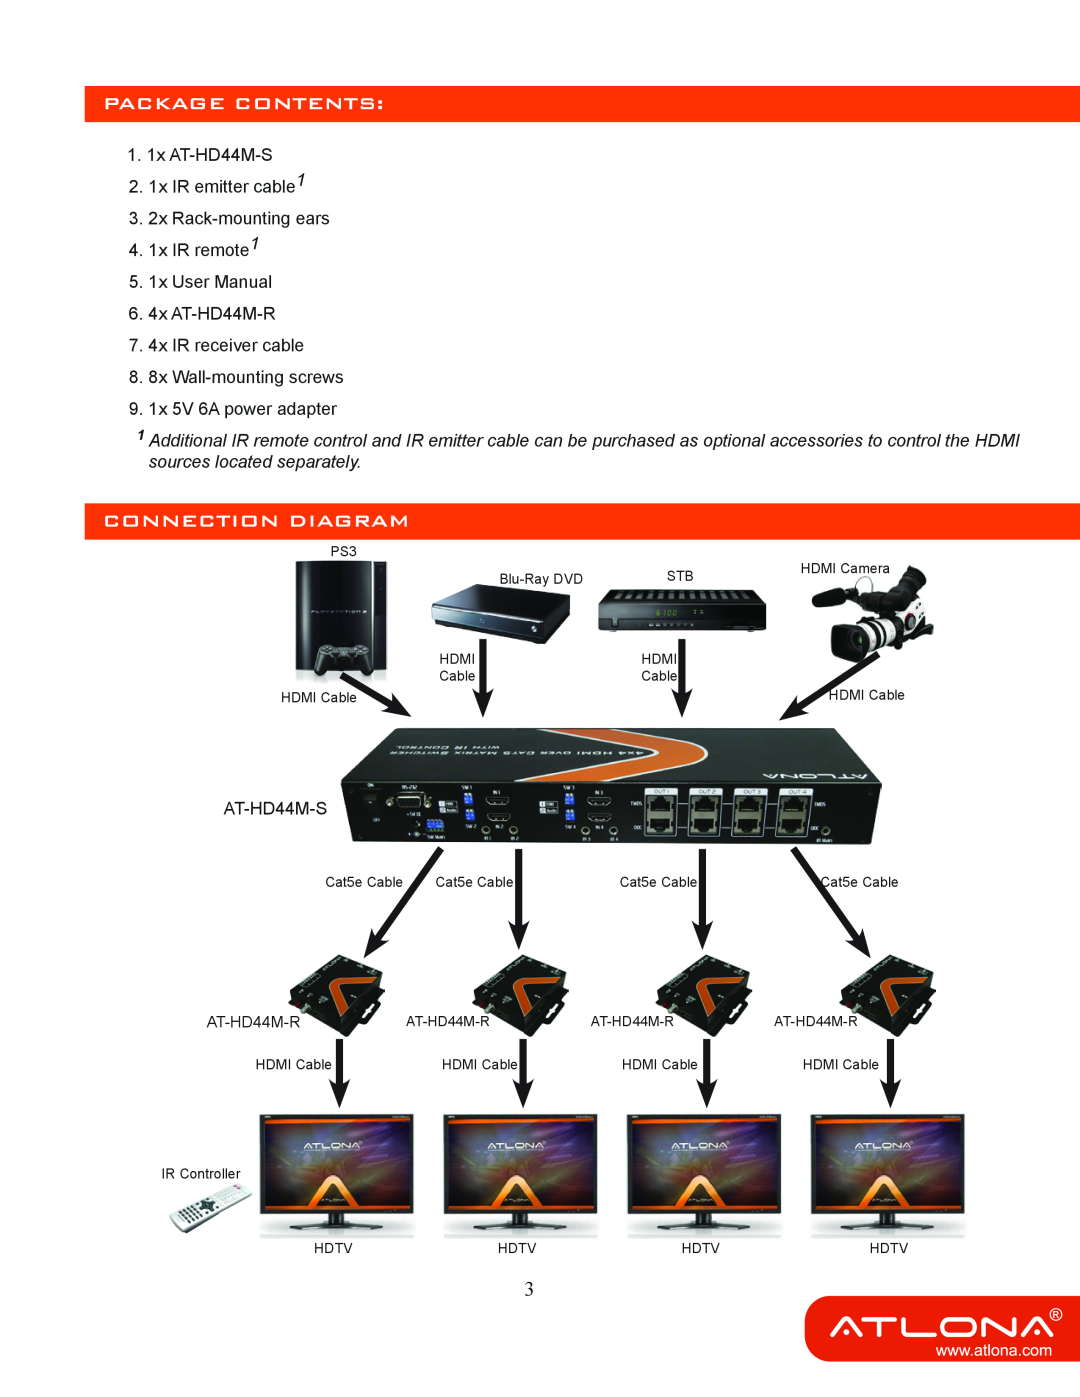 Atlona AT-HD44M-SR manual Package Contents, Connection Diagram 